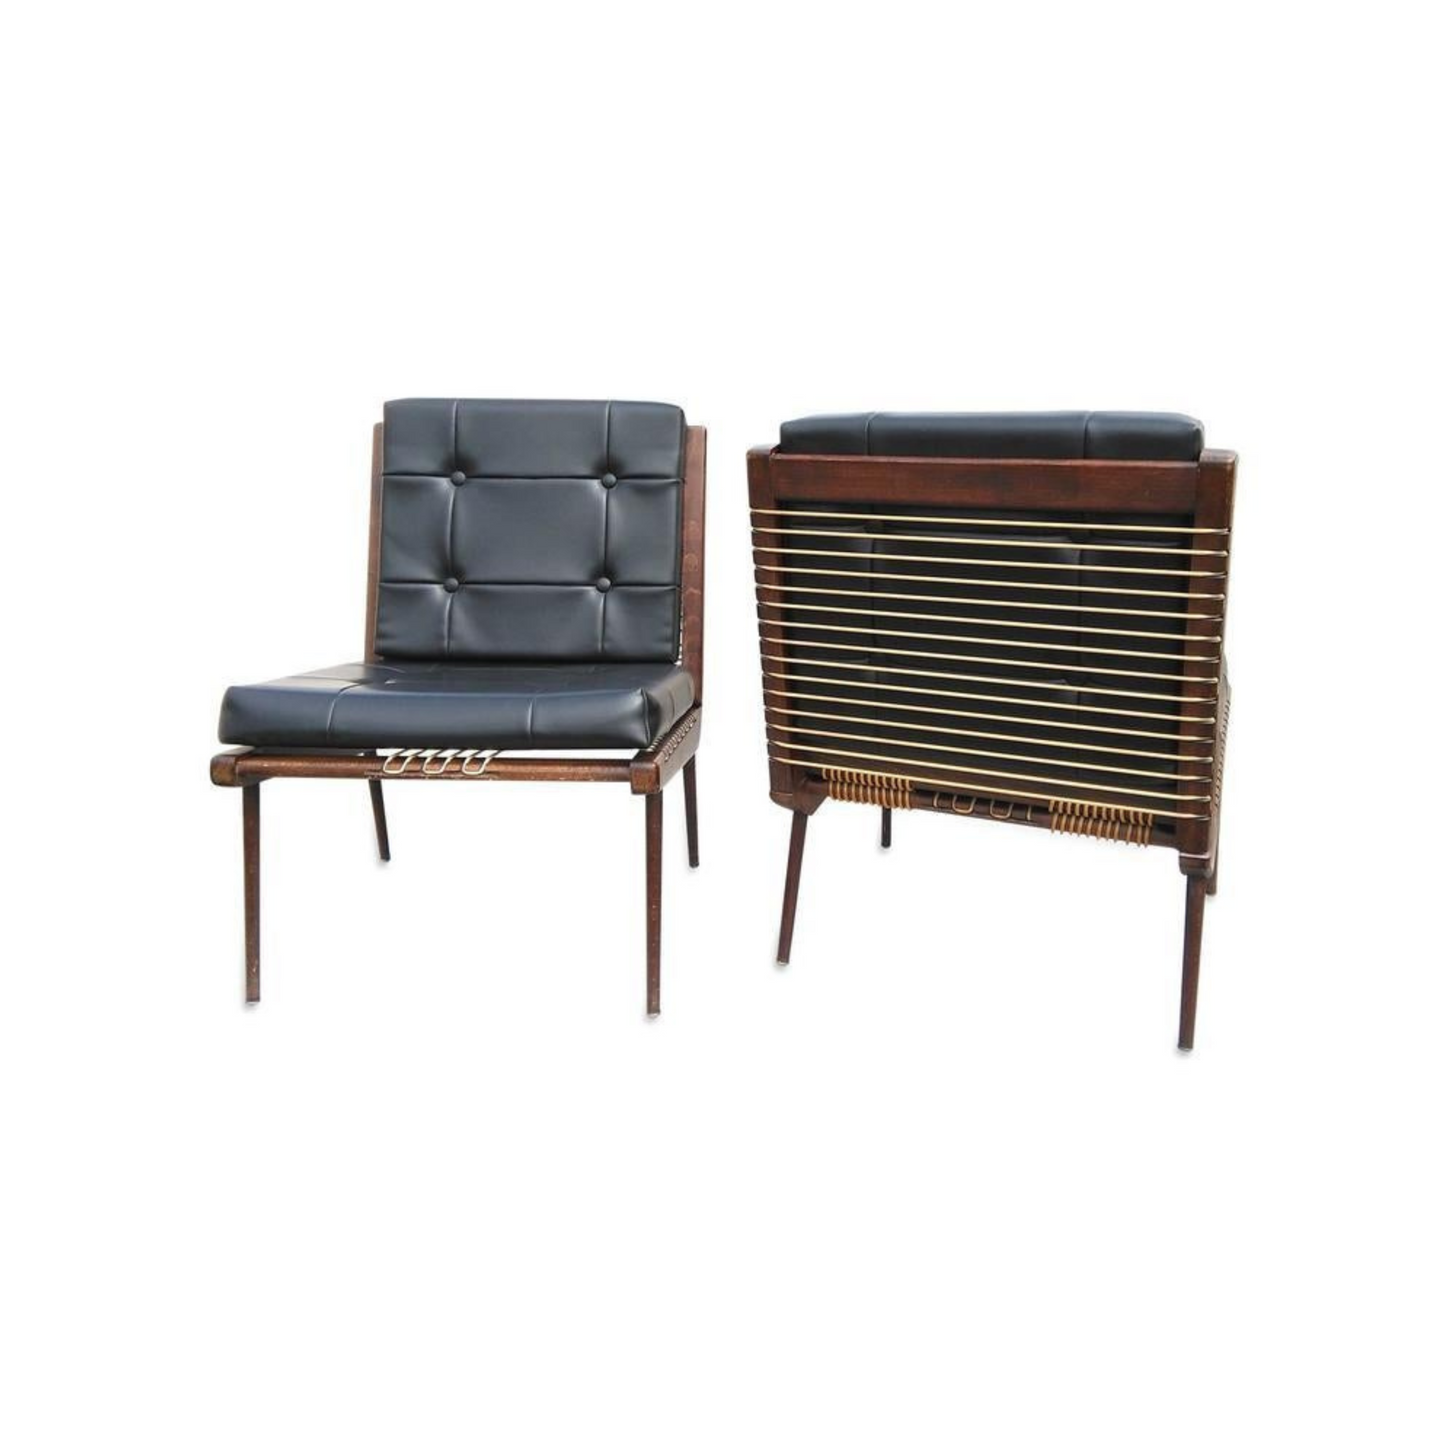 Midcentury French Pair of Teak and Moleskin Lounge Chairs by Georges Tigien